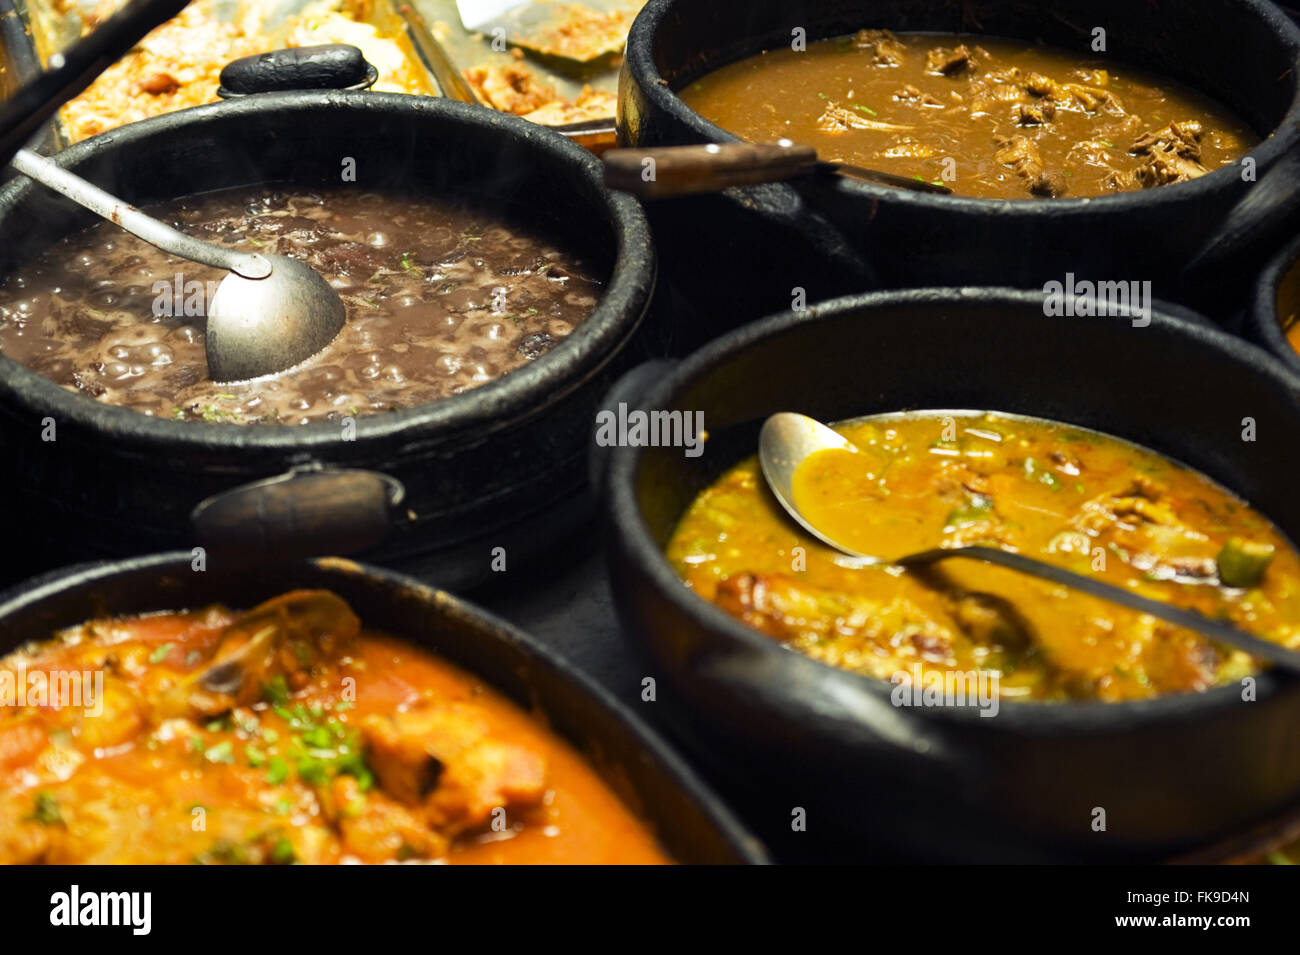 Wood stove with typical local food. Stock Photo